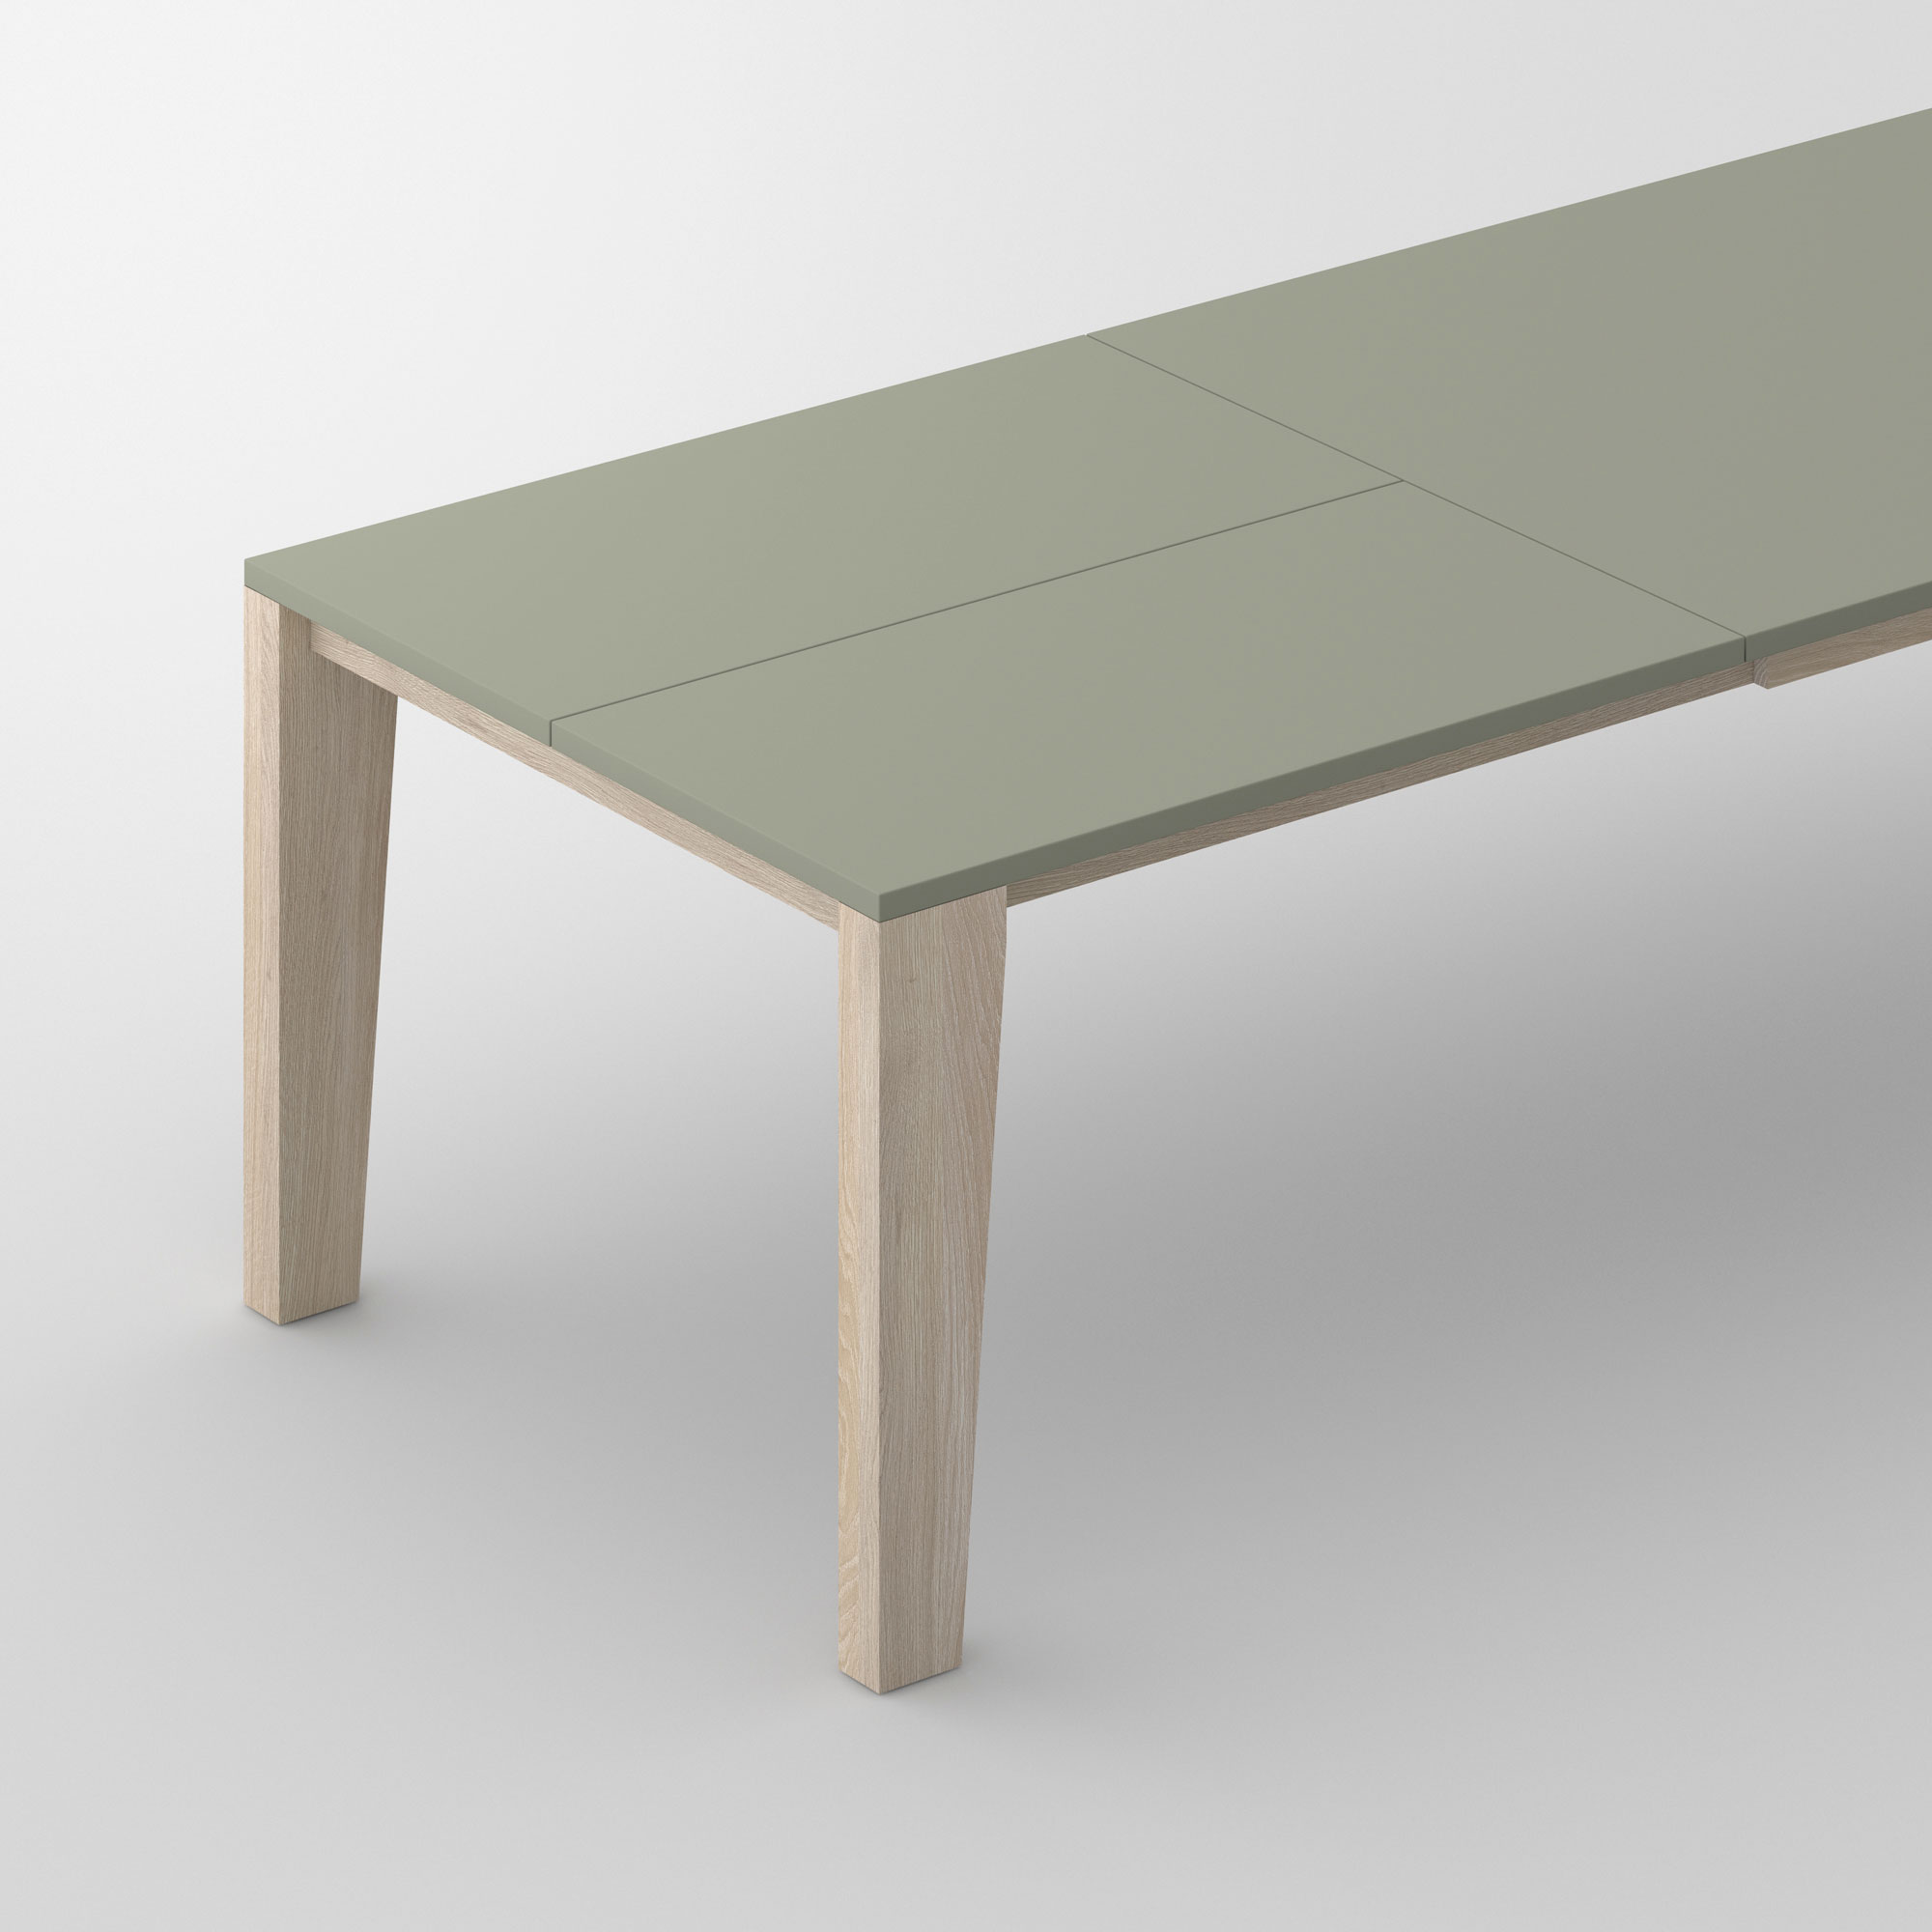 Extensible Linoleum Wood Table VARIUS BUTTERFLY LINO cam1 custom made in solid wood by vitamin design